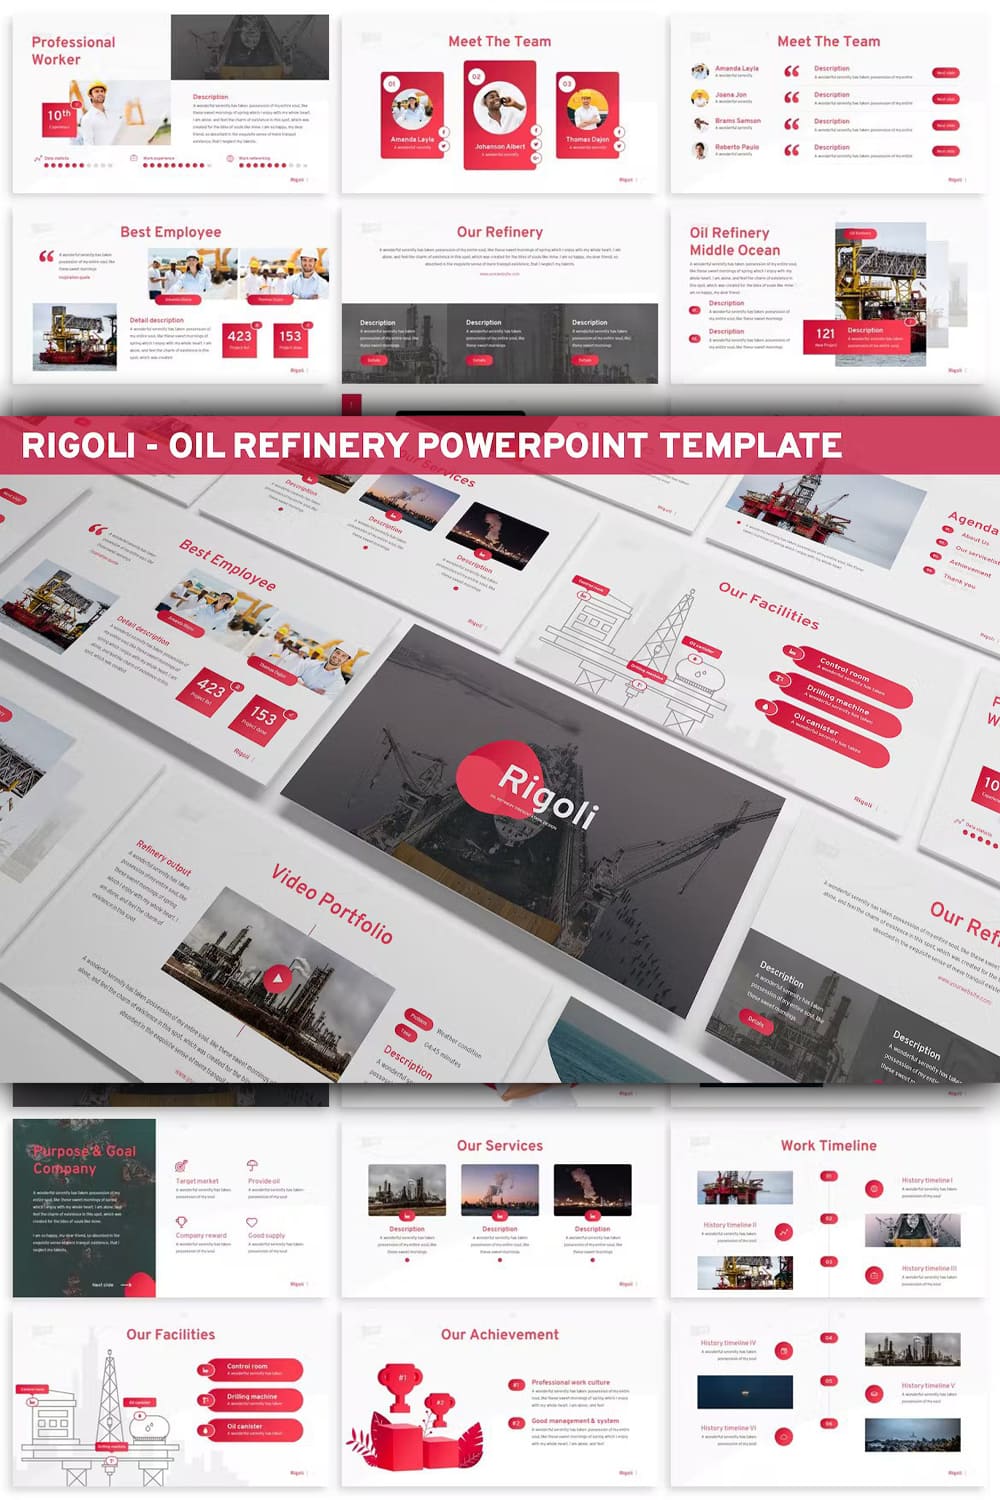 Rigoli oil refinery powerpoint template - pinterest image preview.